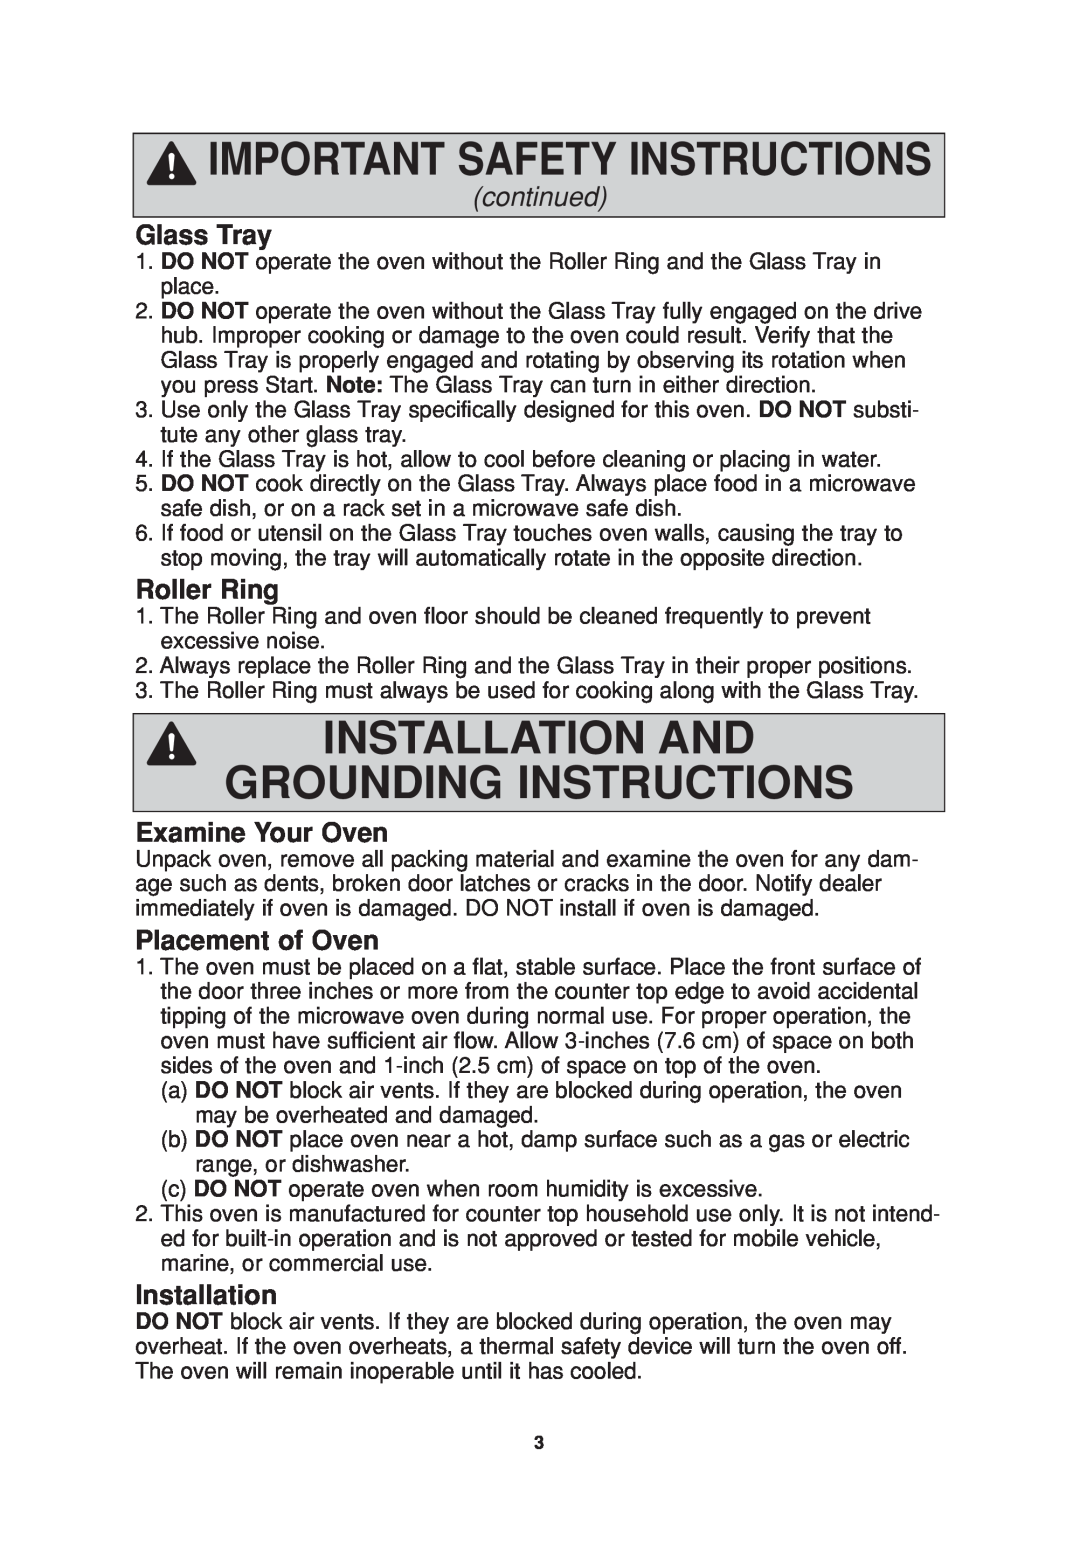 Panasonic NN-S735 Installation And Grounding Instructions, Glass Tray, Roller Ring, Examine Your Oven, Placement of Oven 